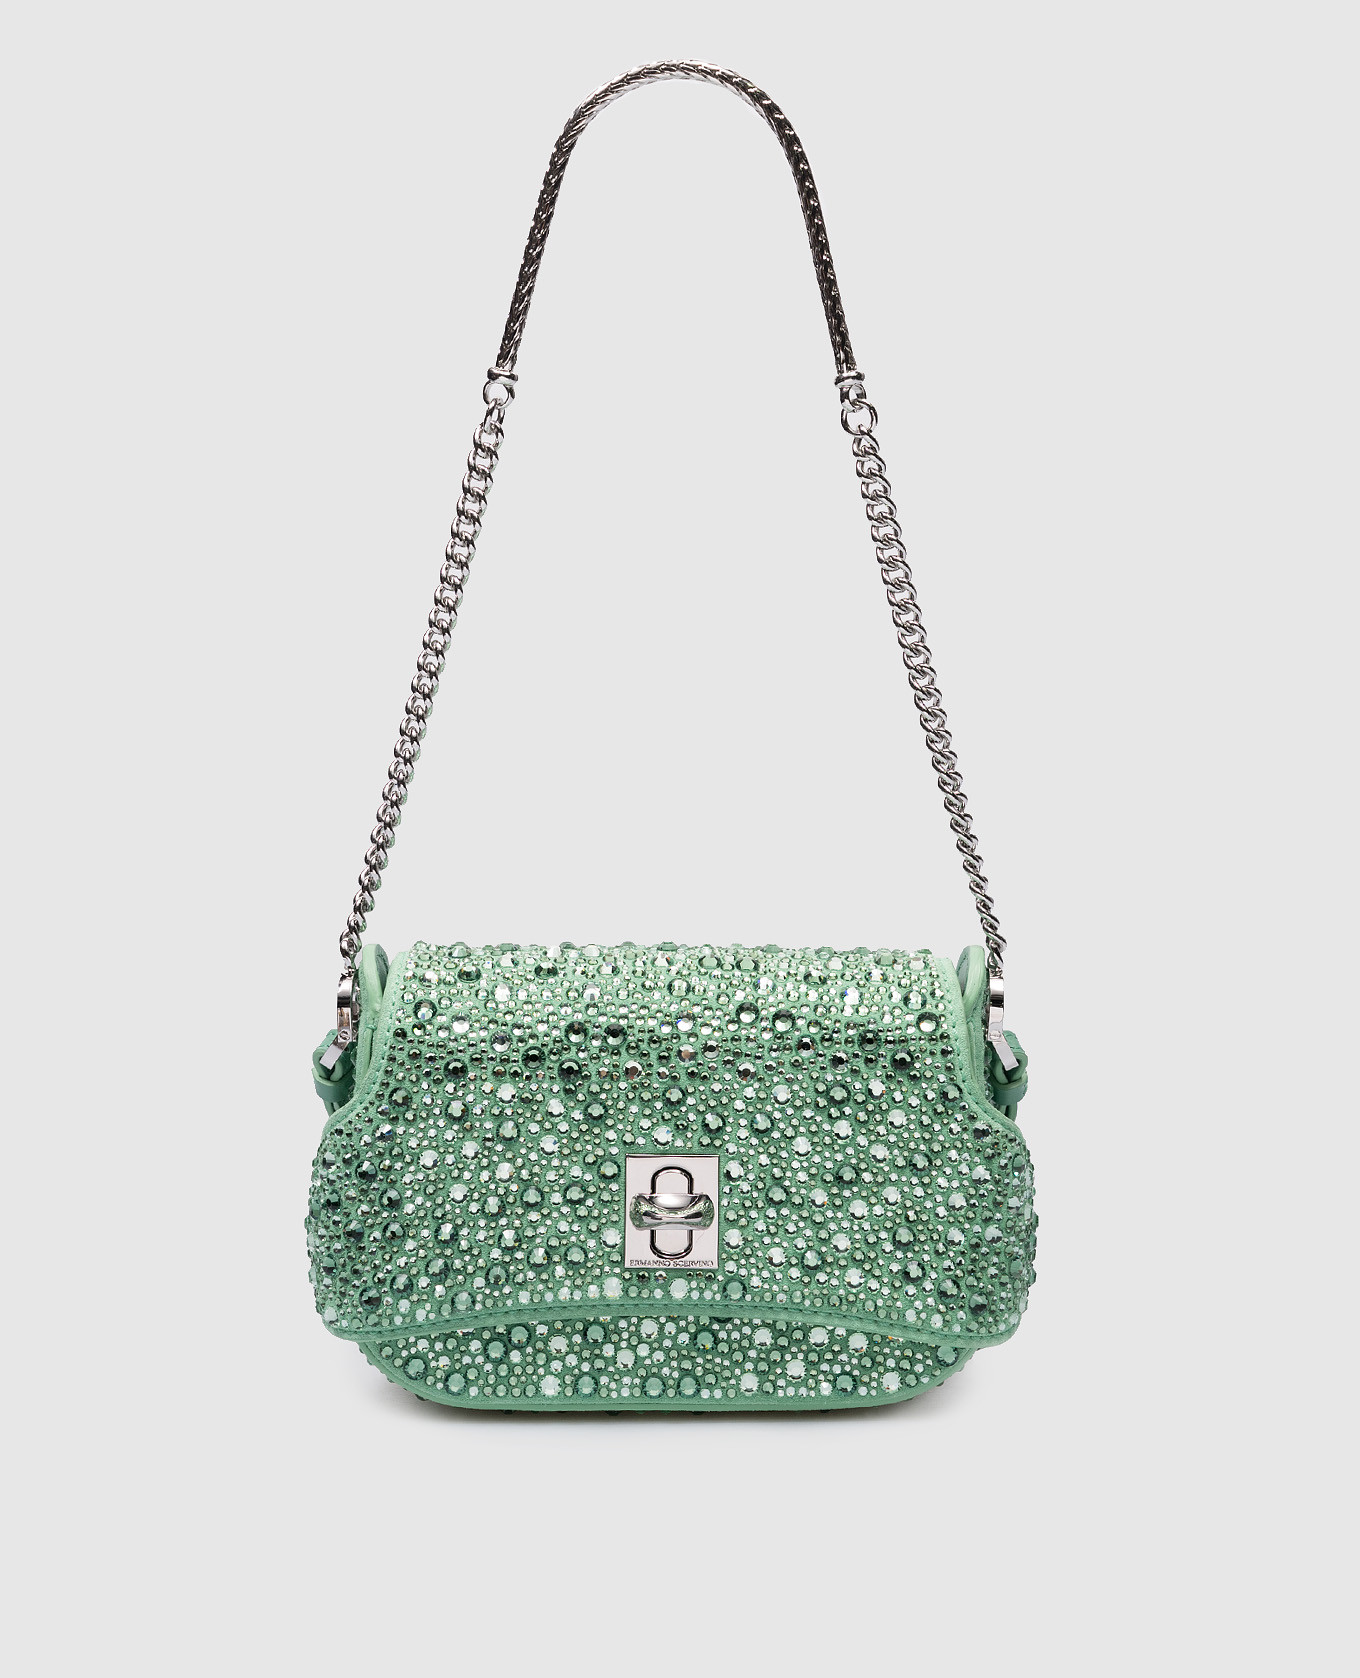 Audrey crossbody bag in green suede with crystals